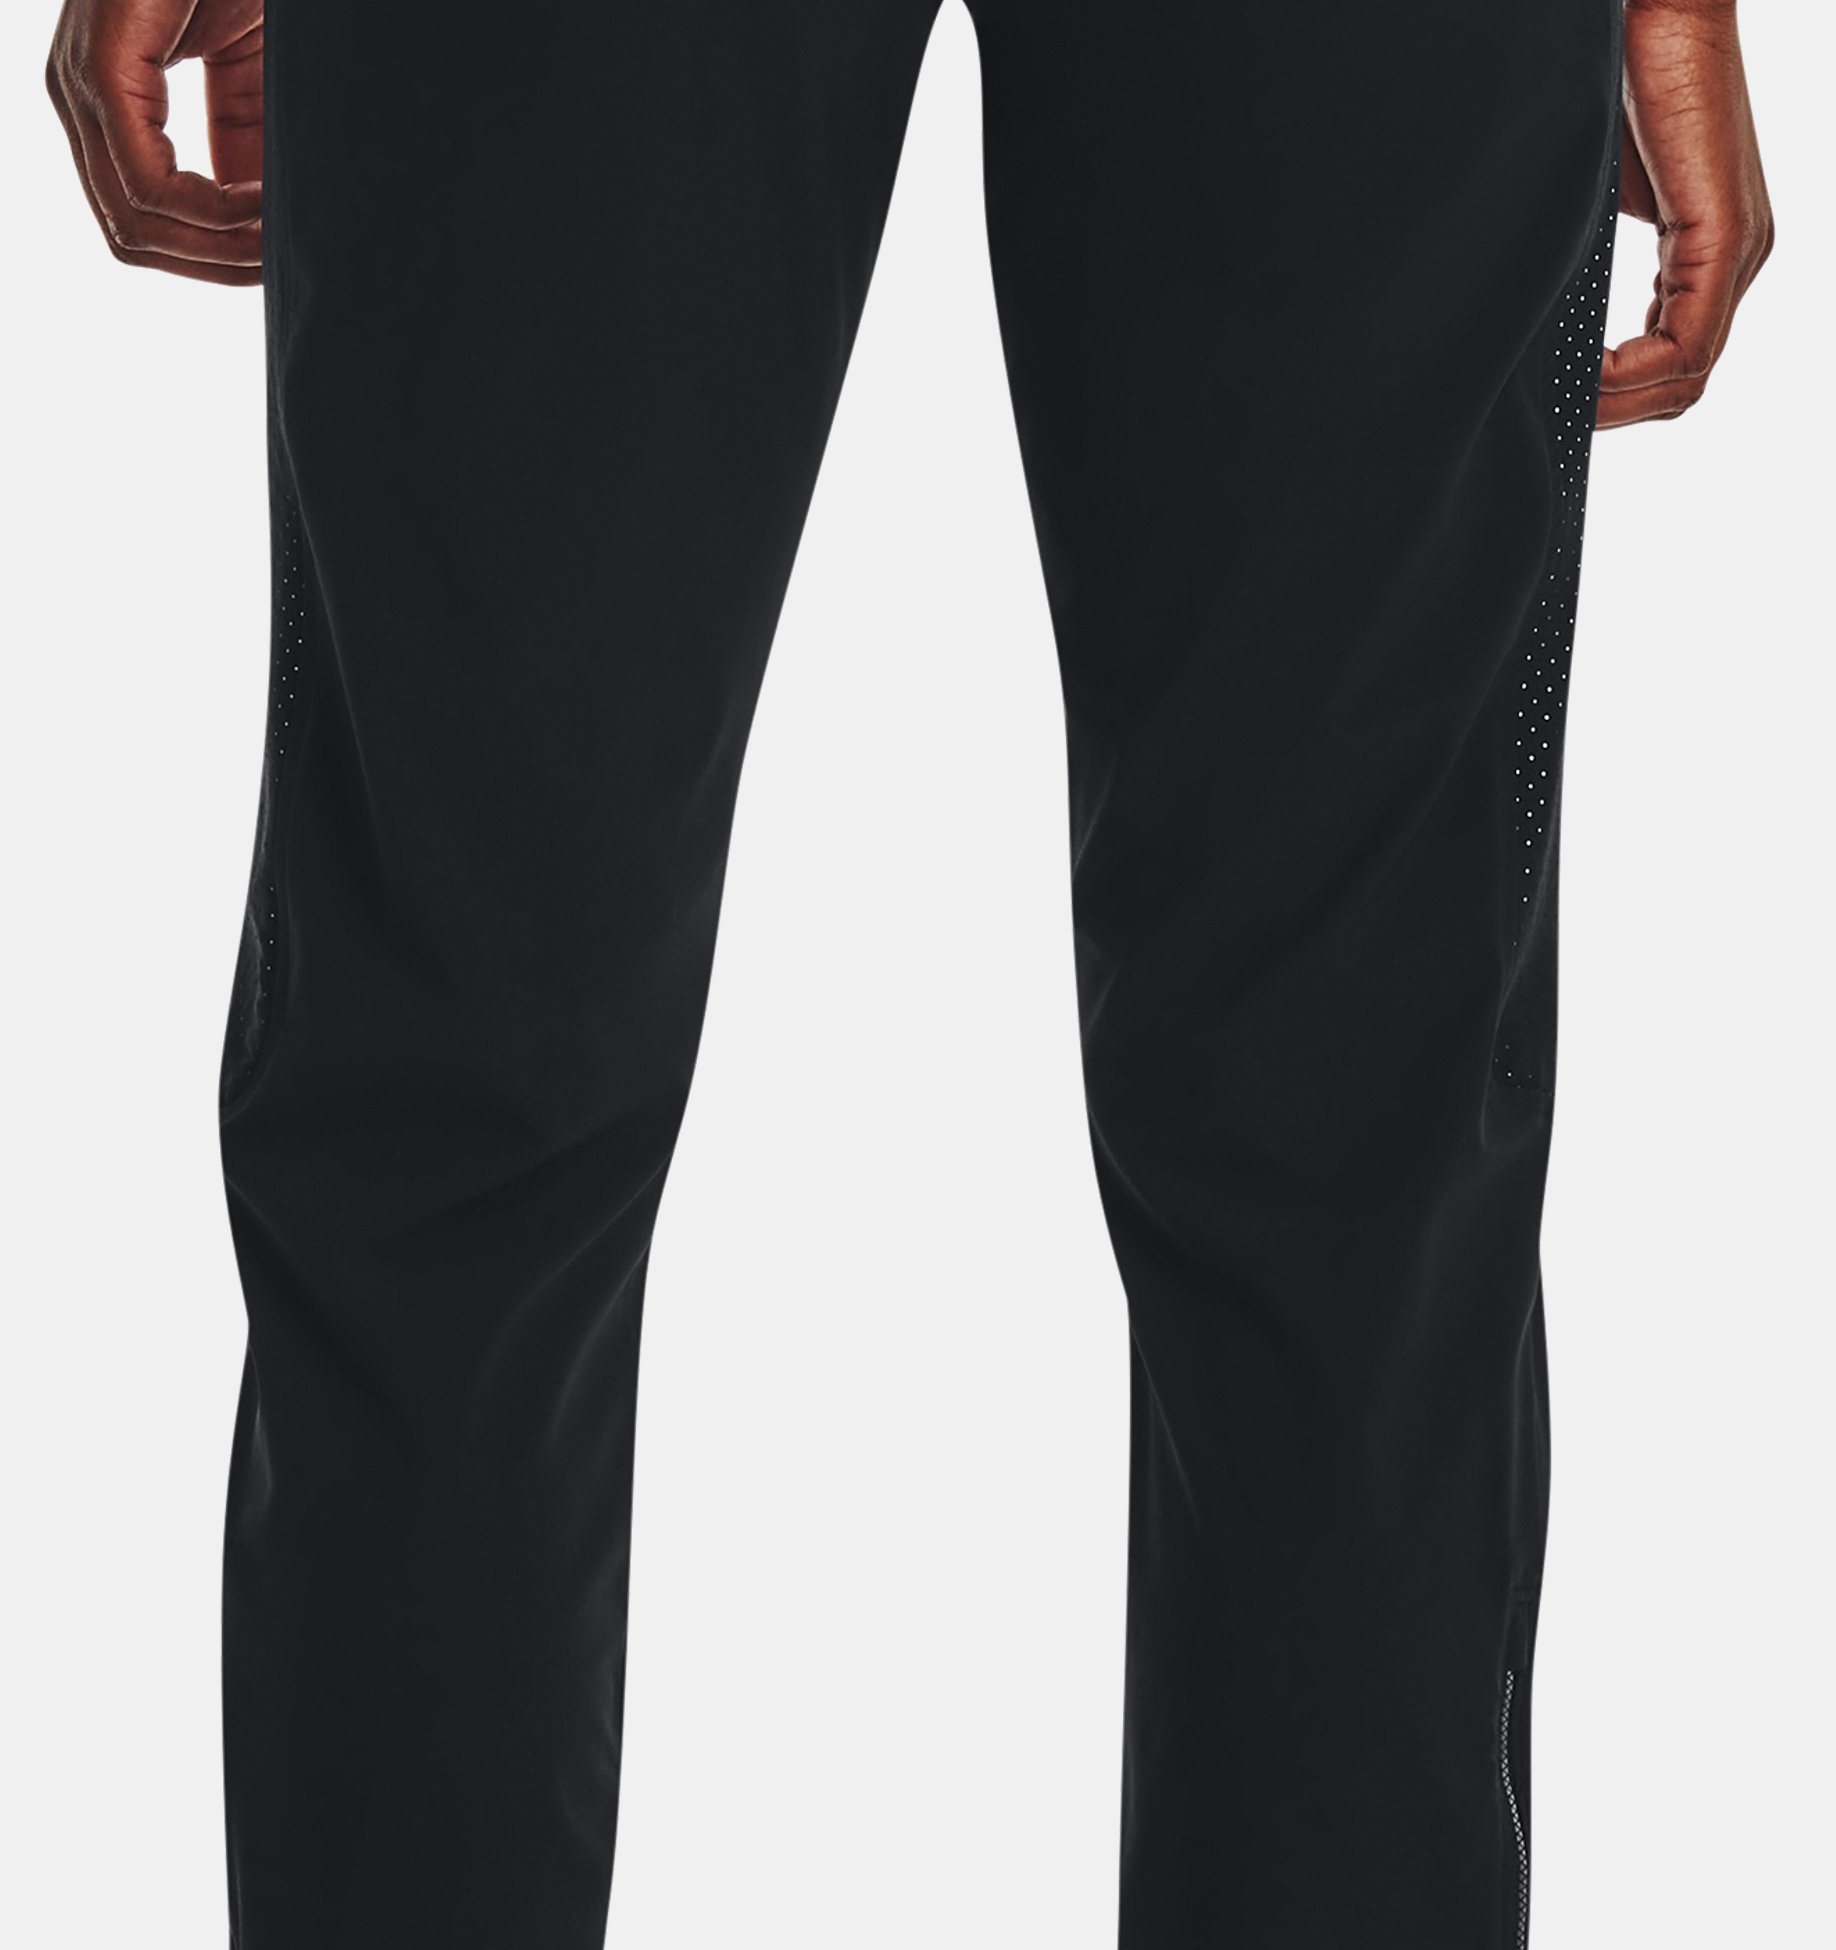 3.0 Warm-Up Pants | Under Armour